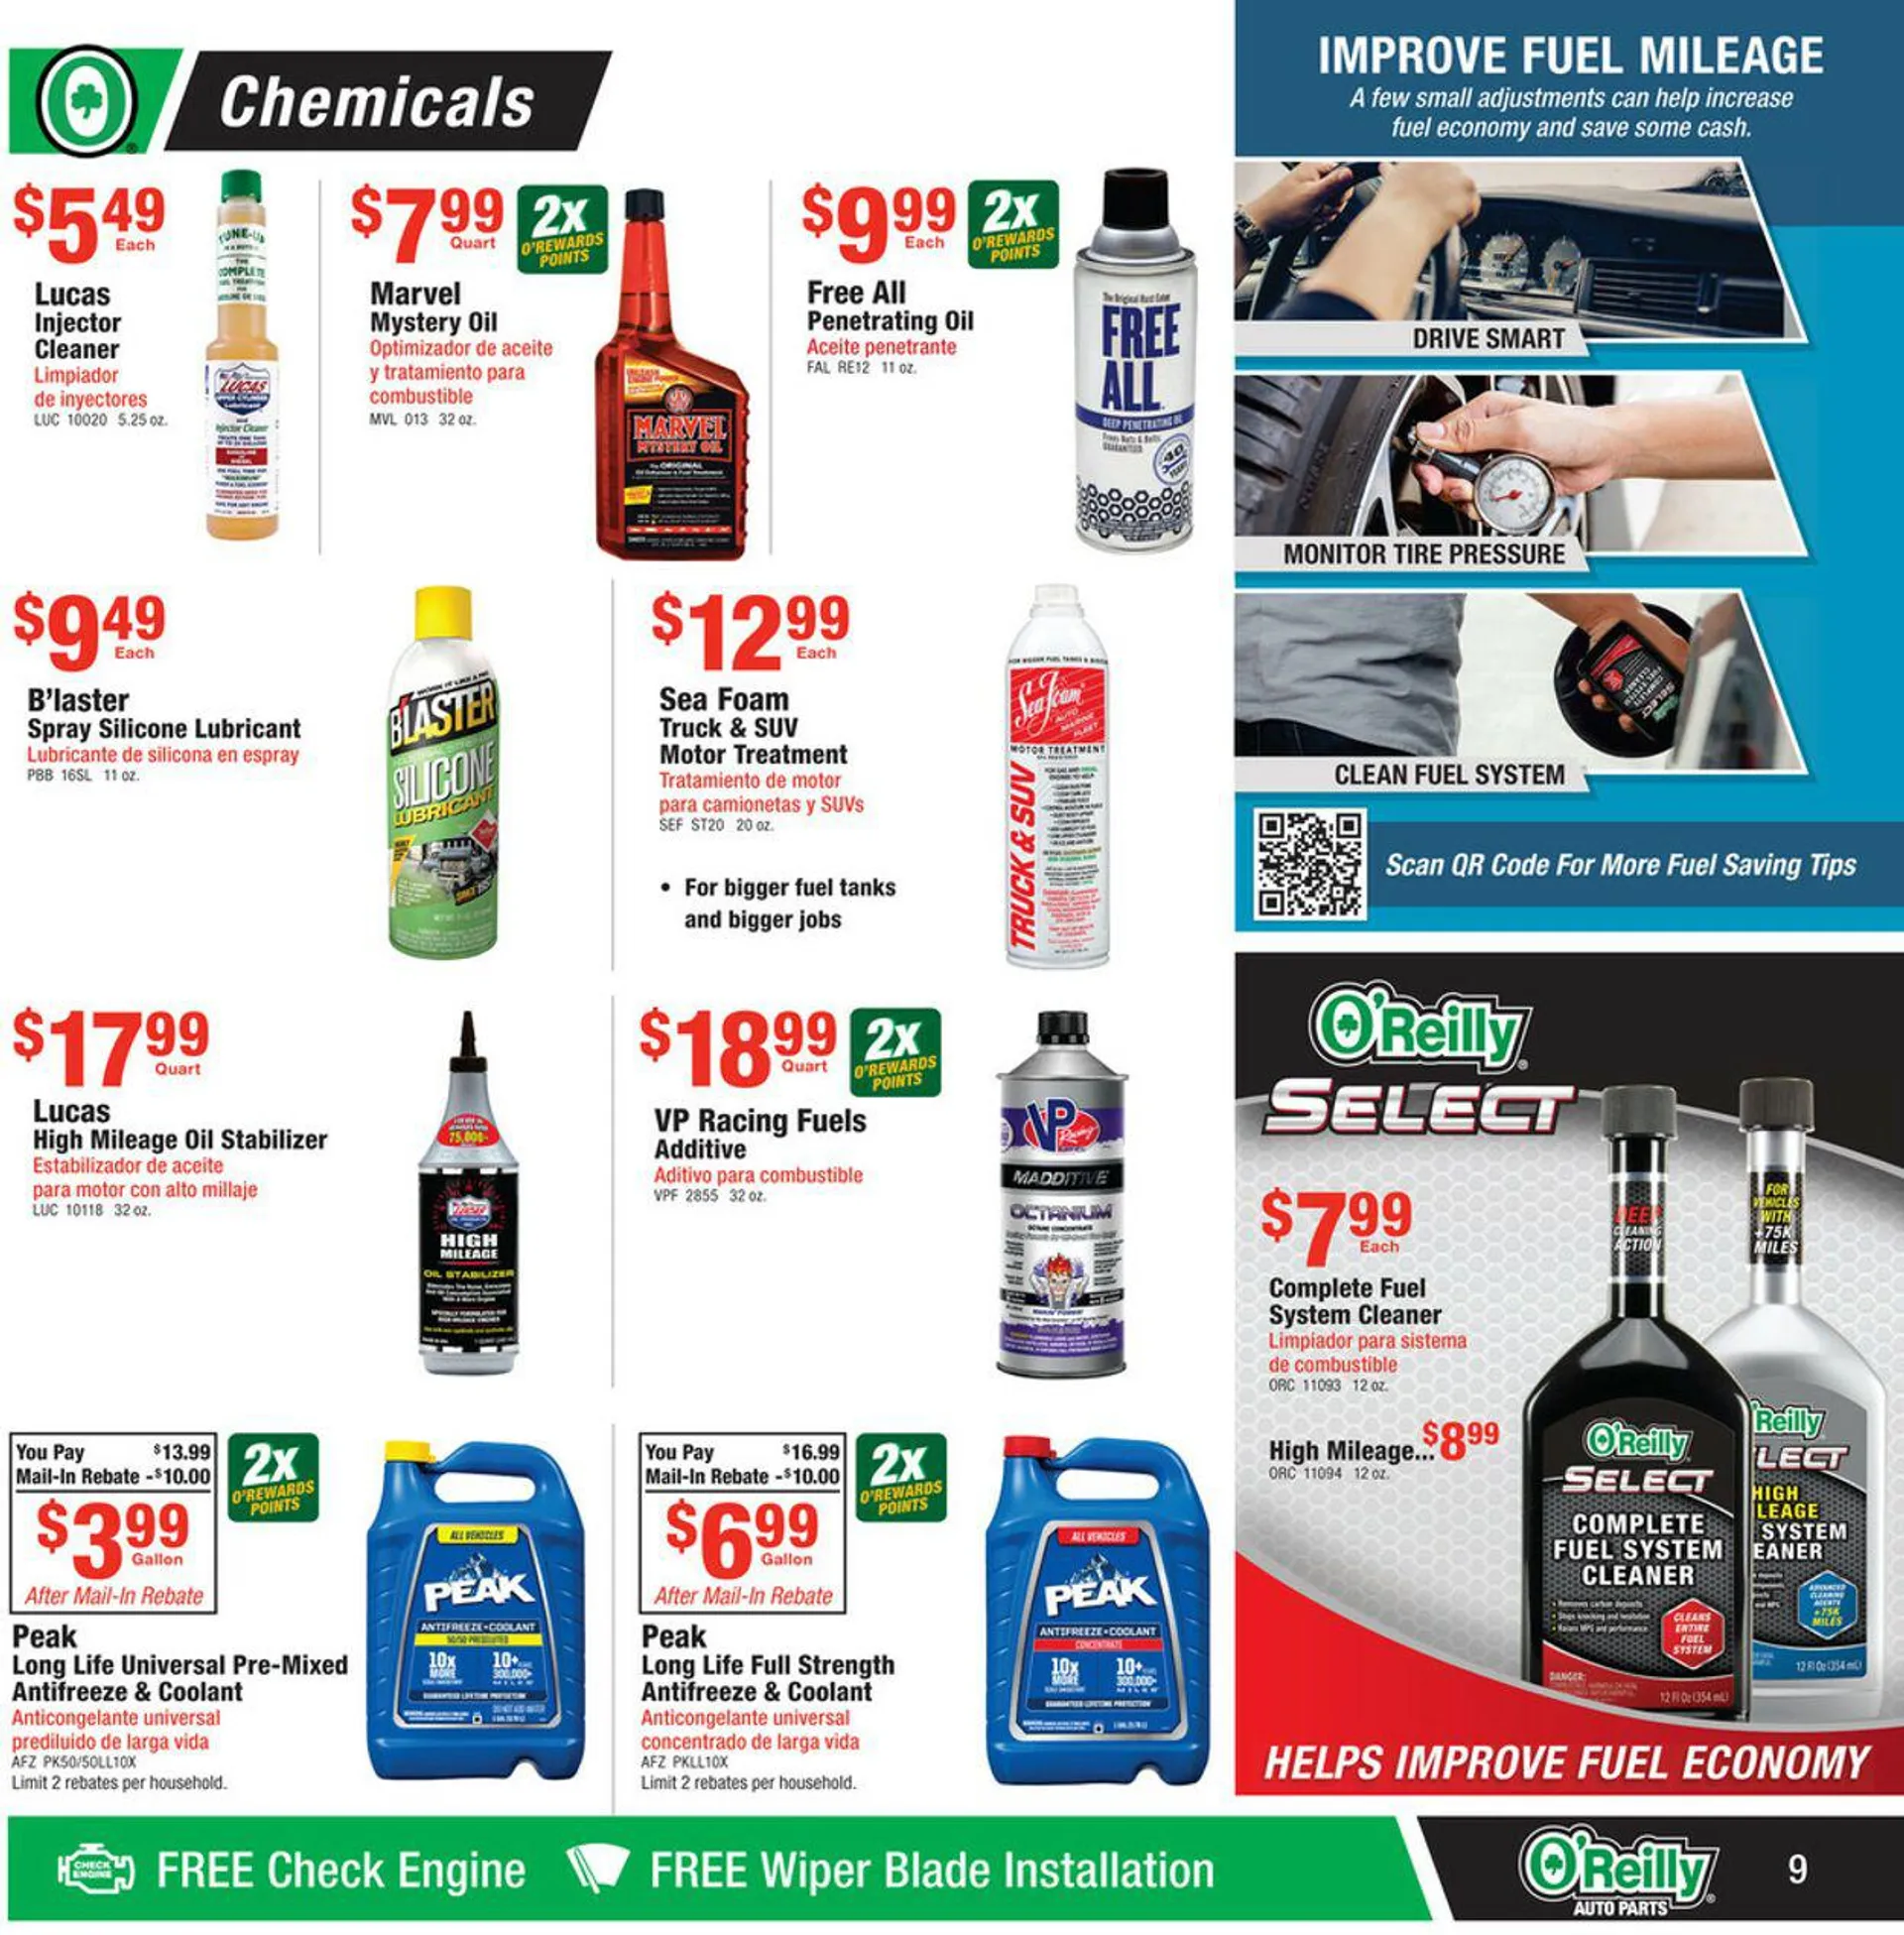 OReilly Auto Parts Current weekly ad - 9